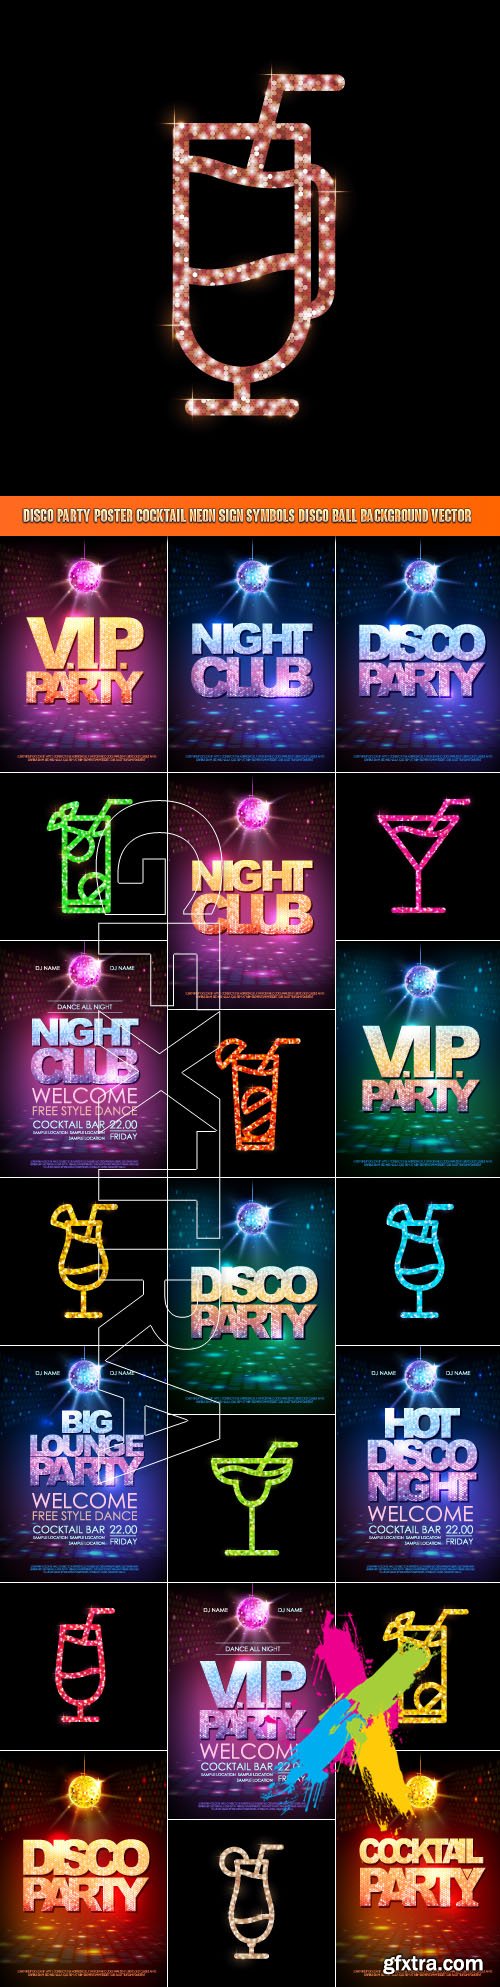 Disco party poster cocktail Neon Sign Symbols Disco ball background vector